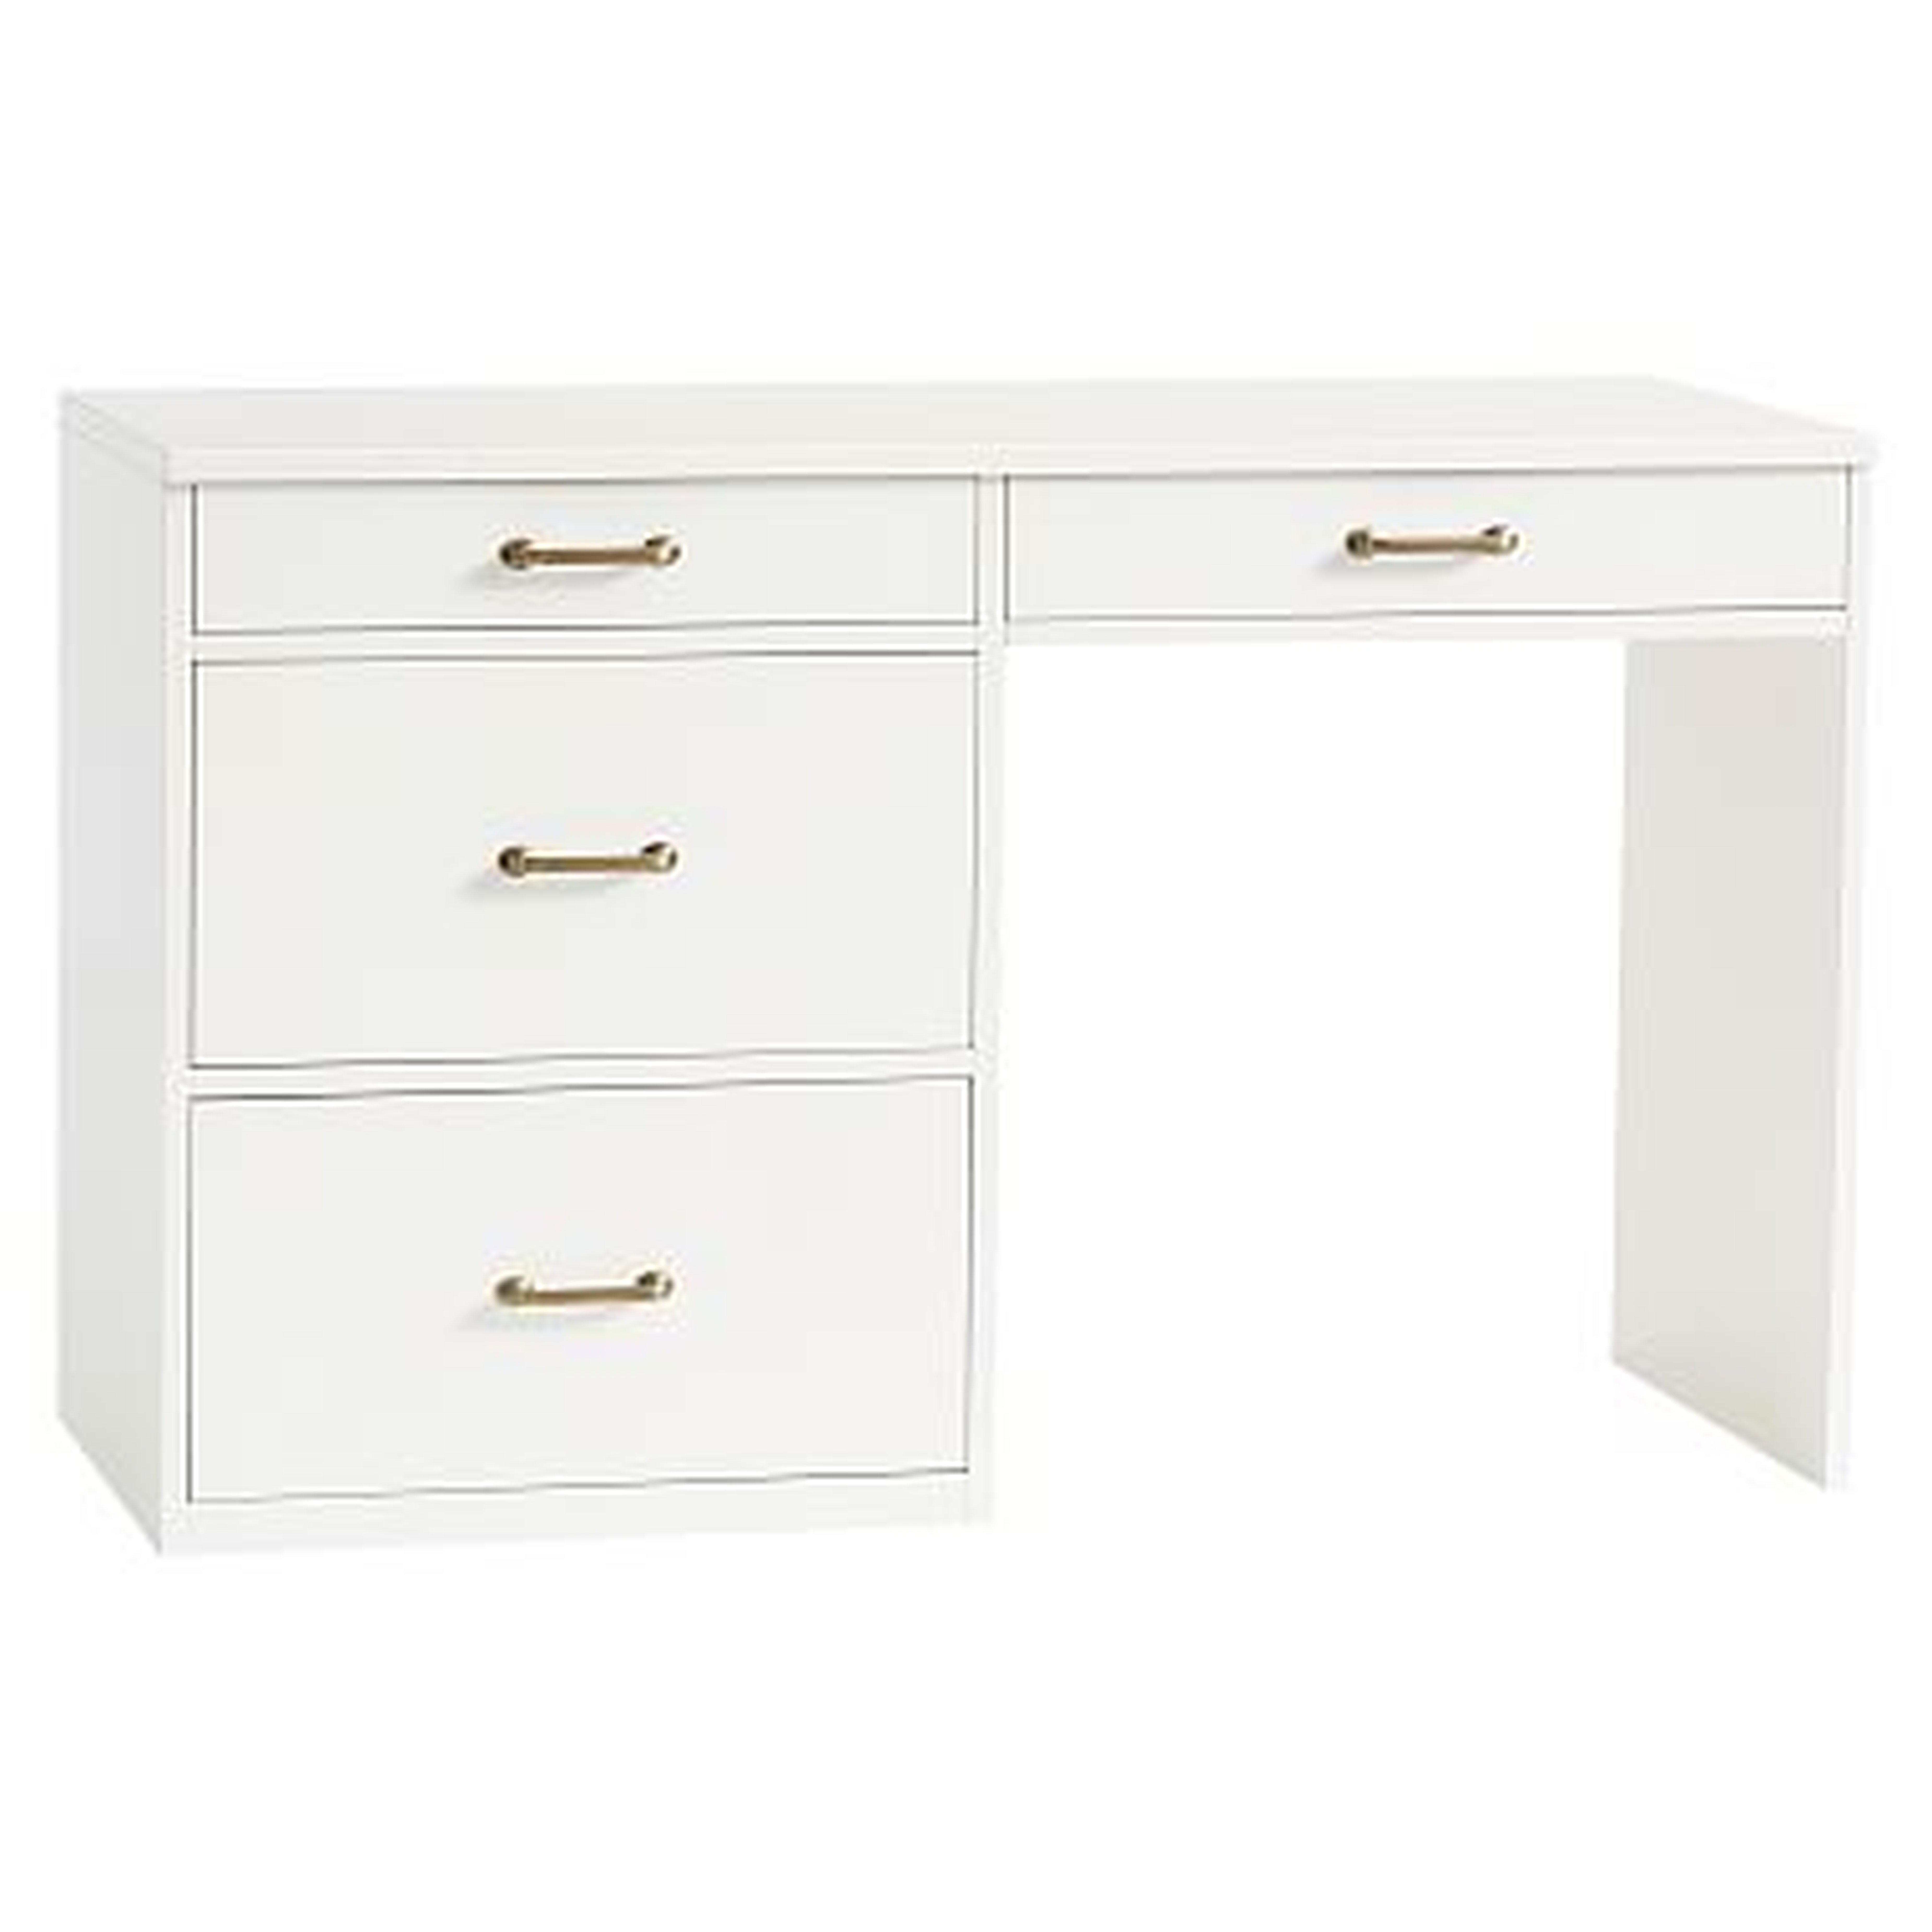 Waverly Desk, Water-Based Simply White - Pottery Barn Teen